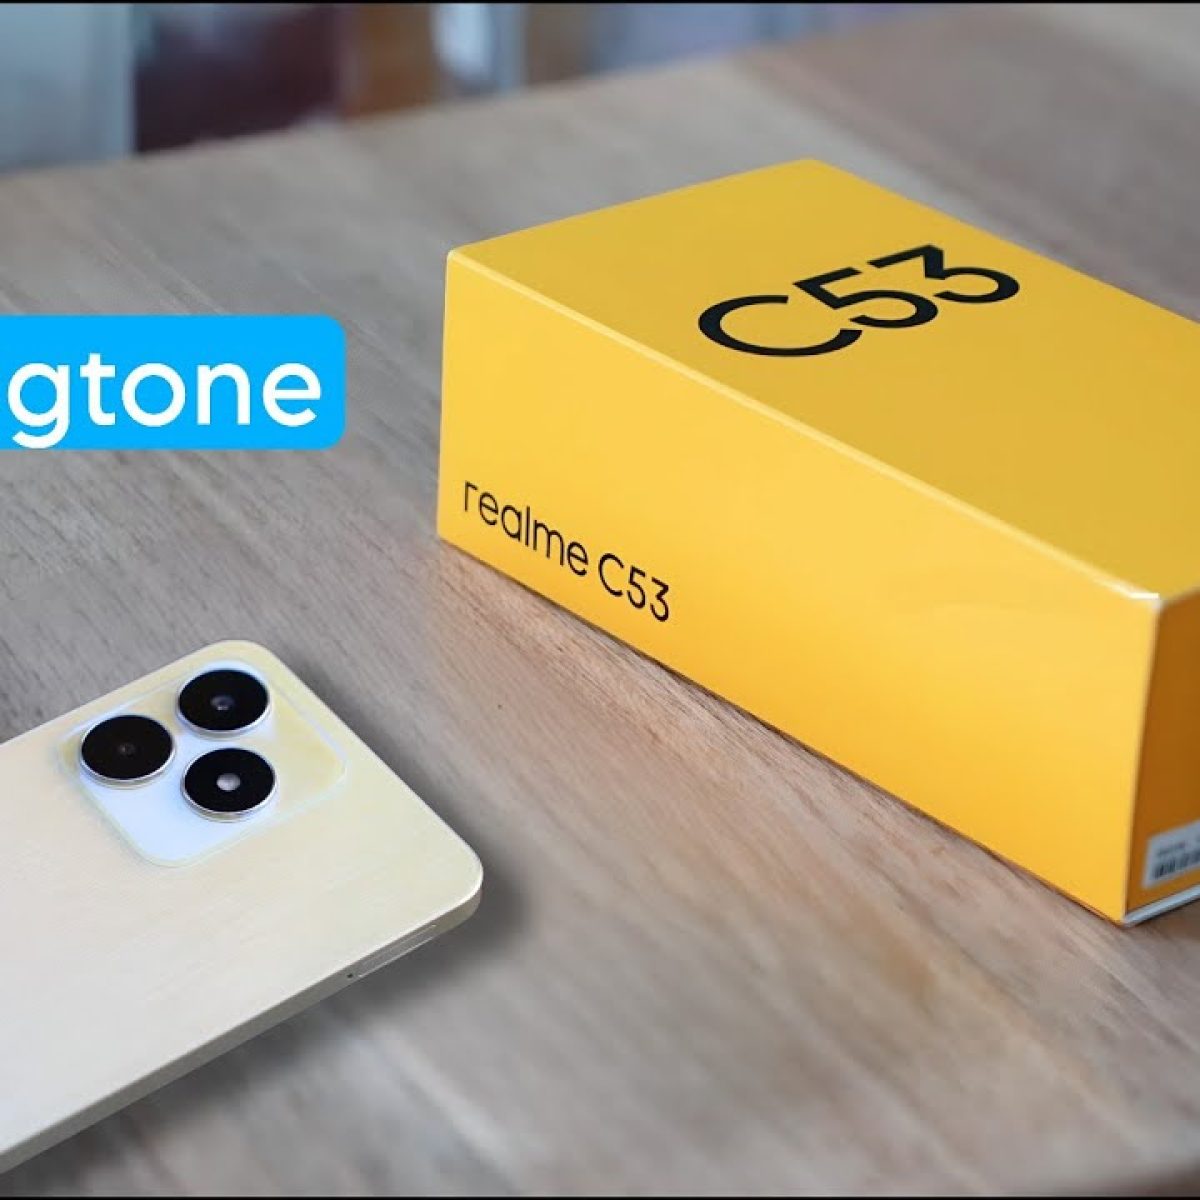 HOW TO SET DIFFERENT RINGTONES FOR DIFFERENT CONTACT - realme Community